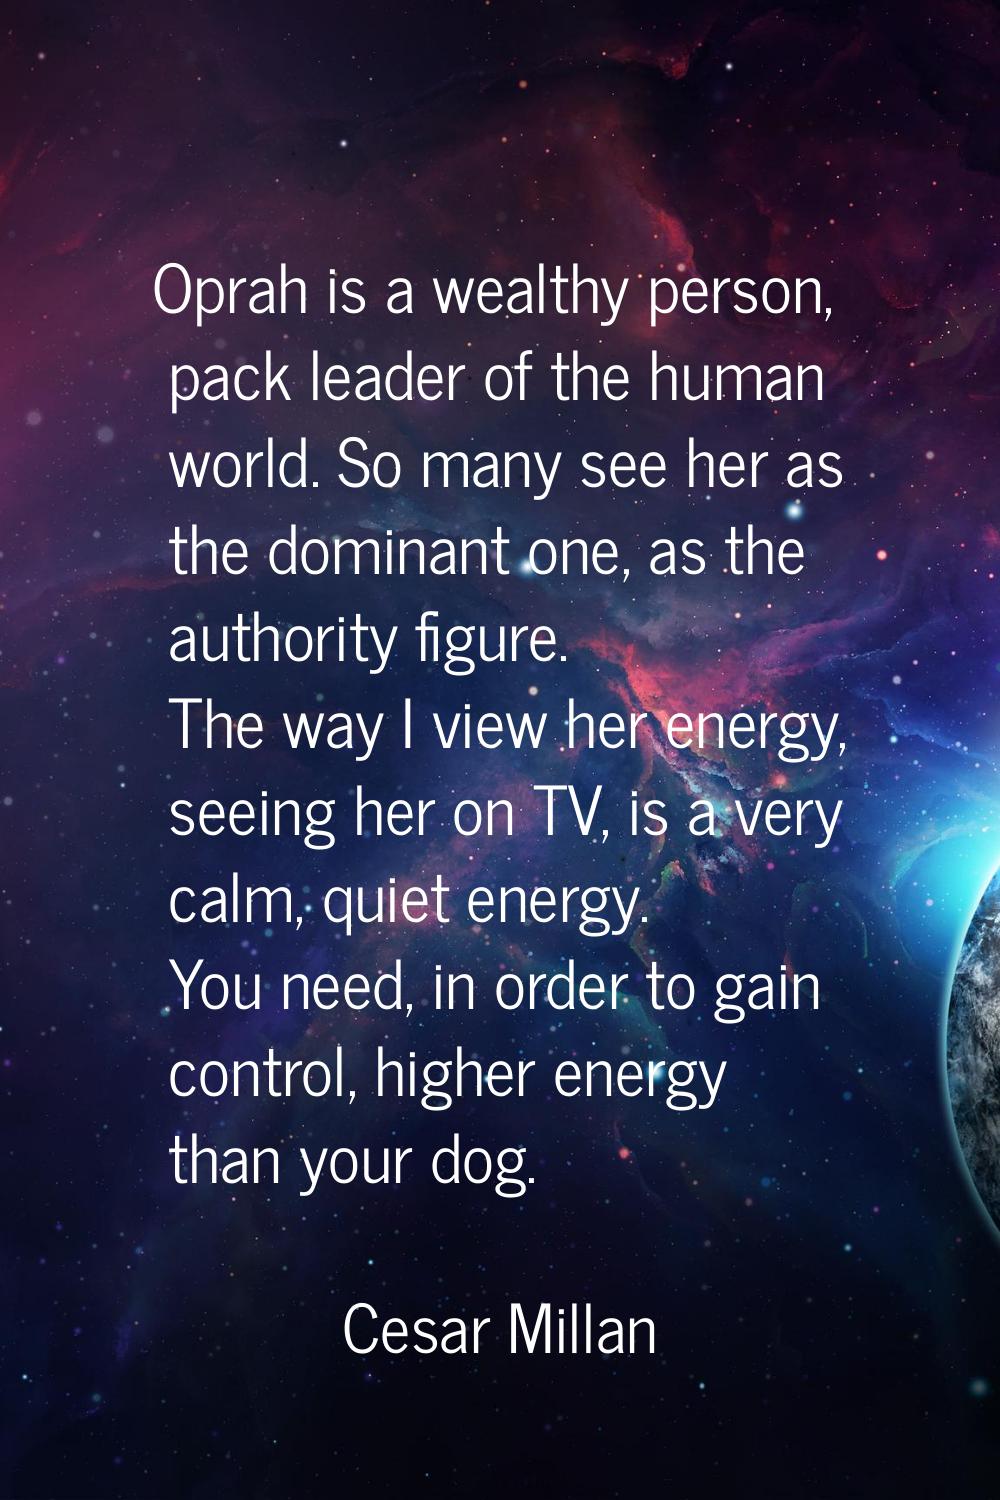 Oprah is a wealthy person, pack leader of the human world. So many see her as the dominant one, as 